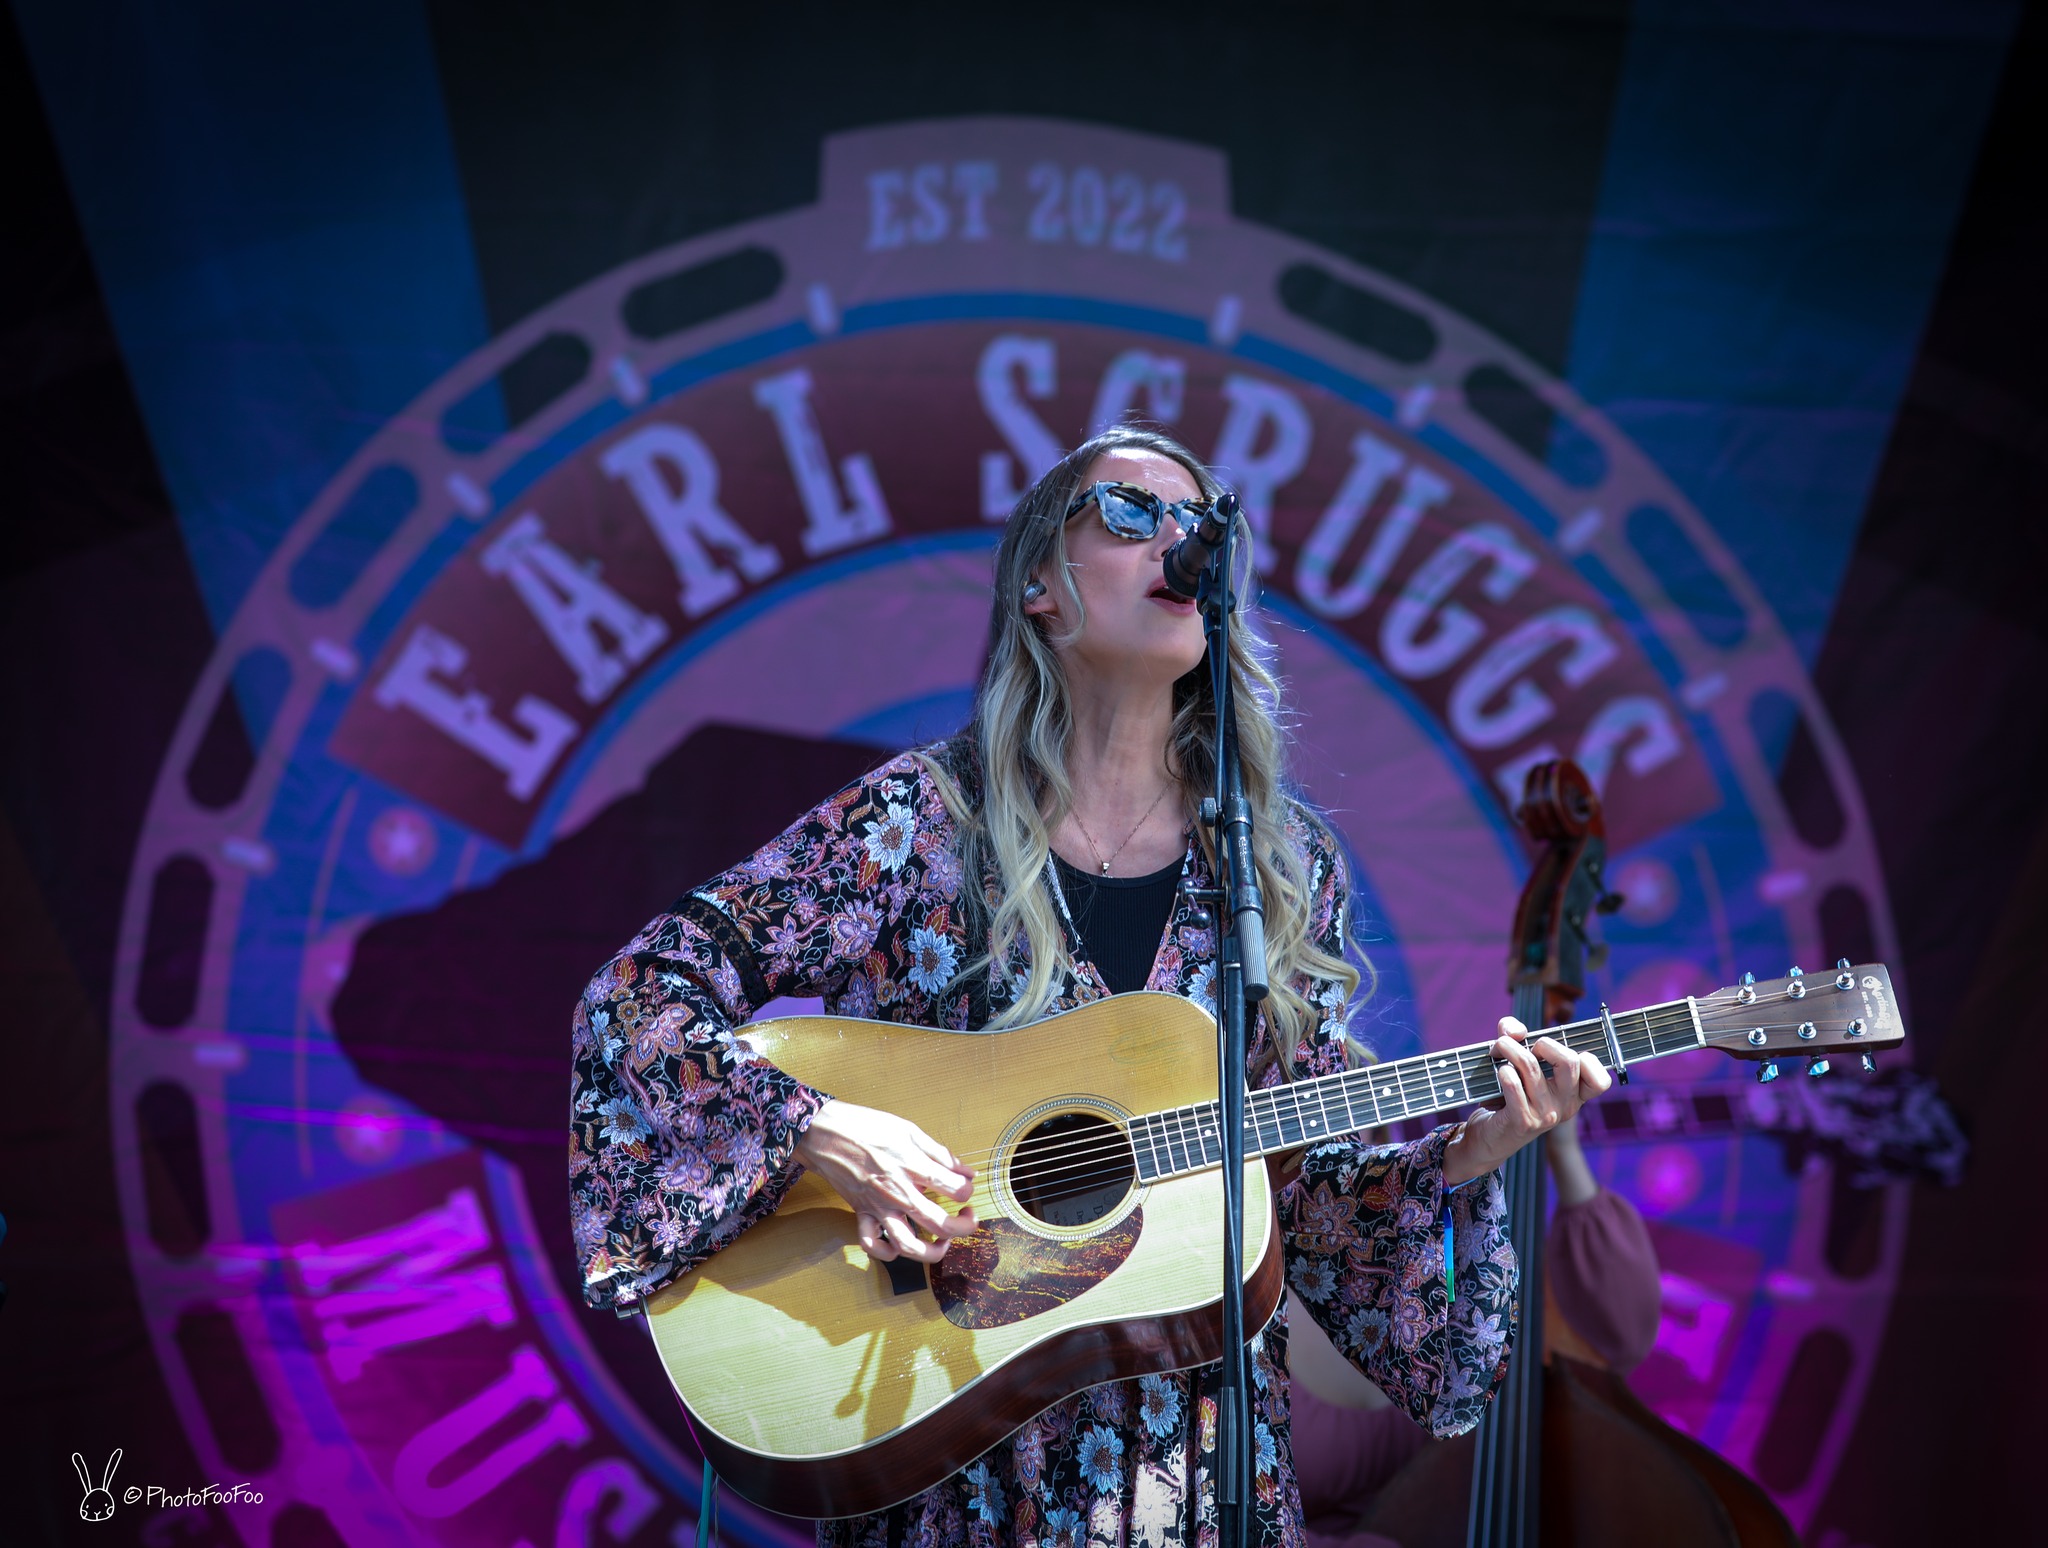 String Theory Decoding the Magic of the Earl Scruggs Festival